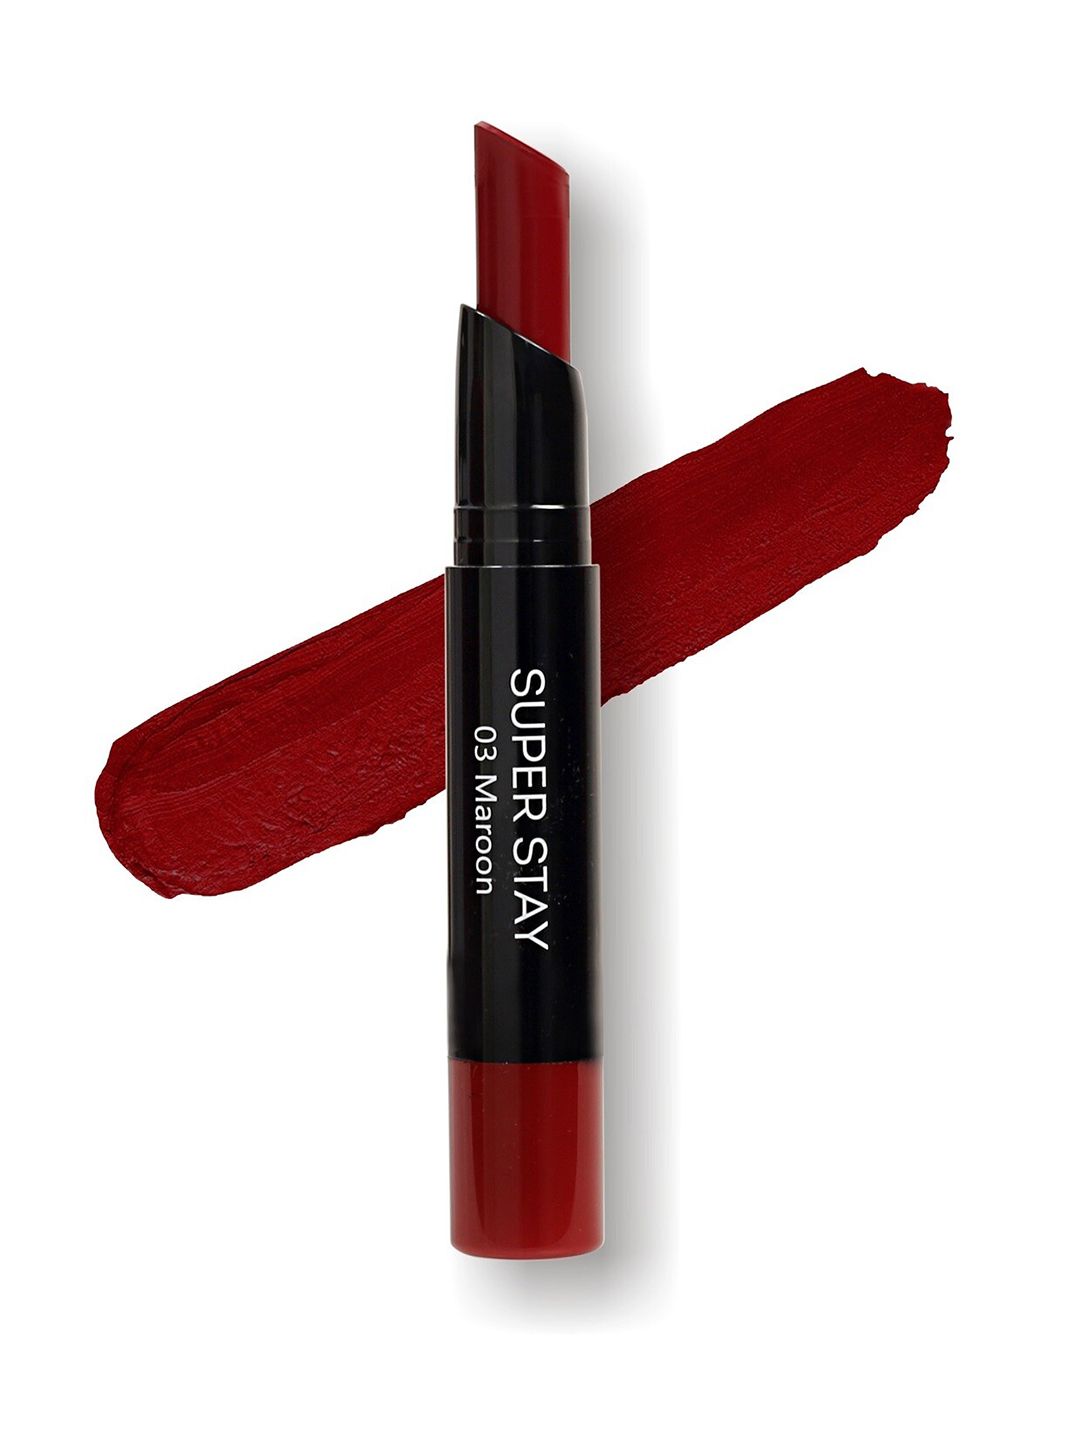 ME-ON Super Stay Lipstick Shade 03 (Maroon) Price in India